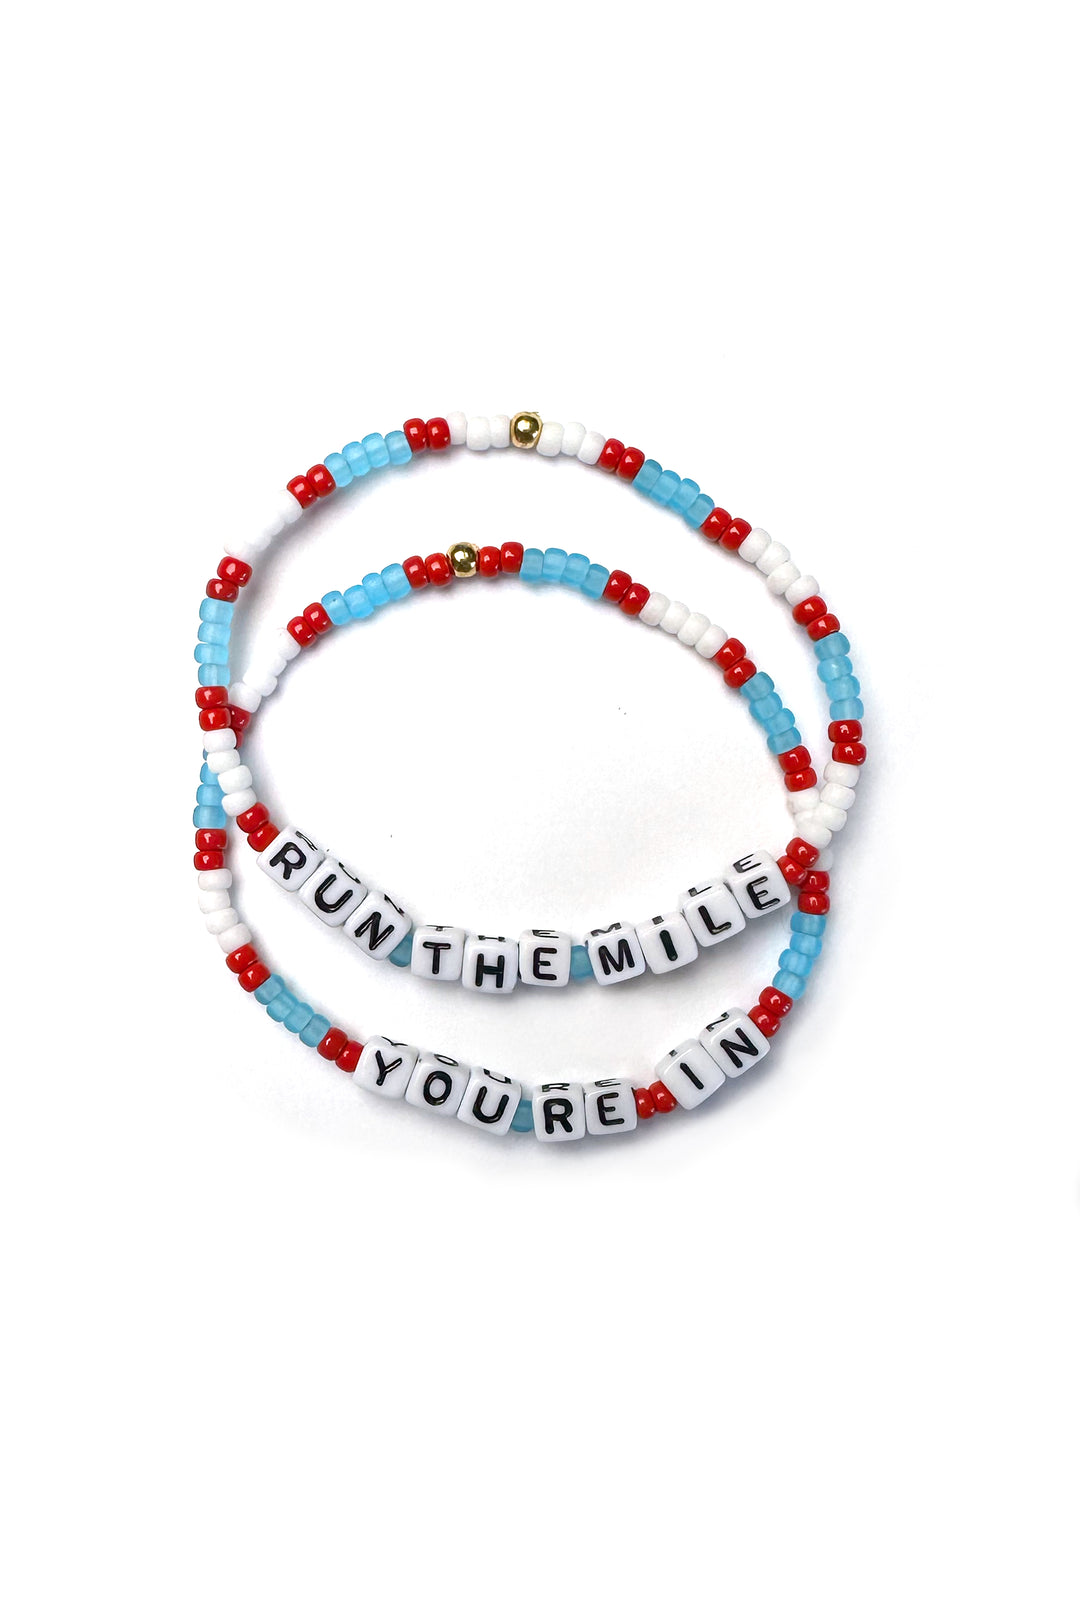 Run The Mile You're In Chicago Bracelet